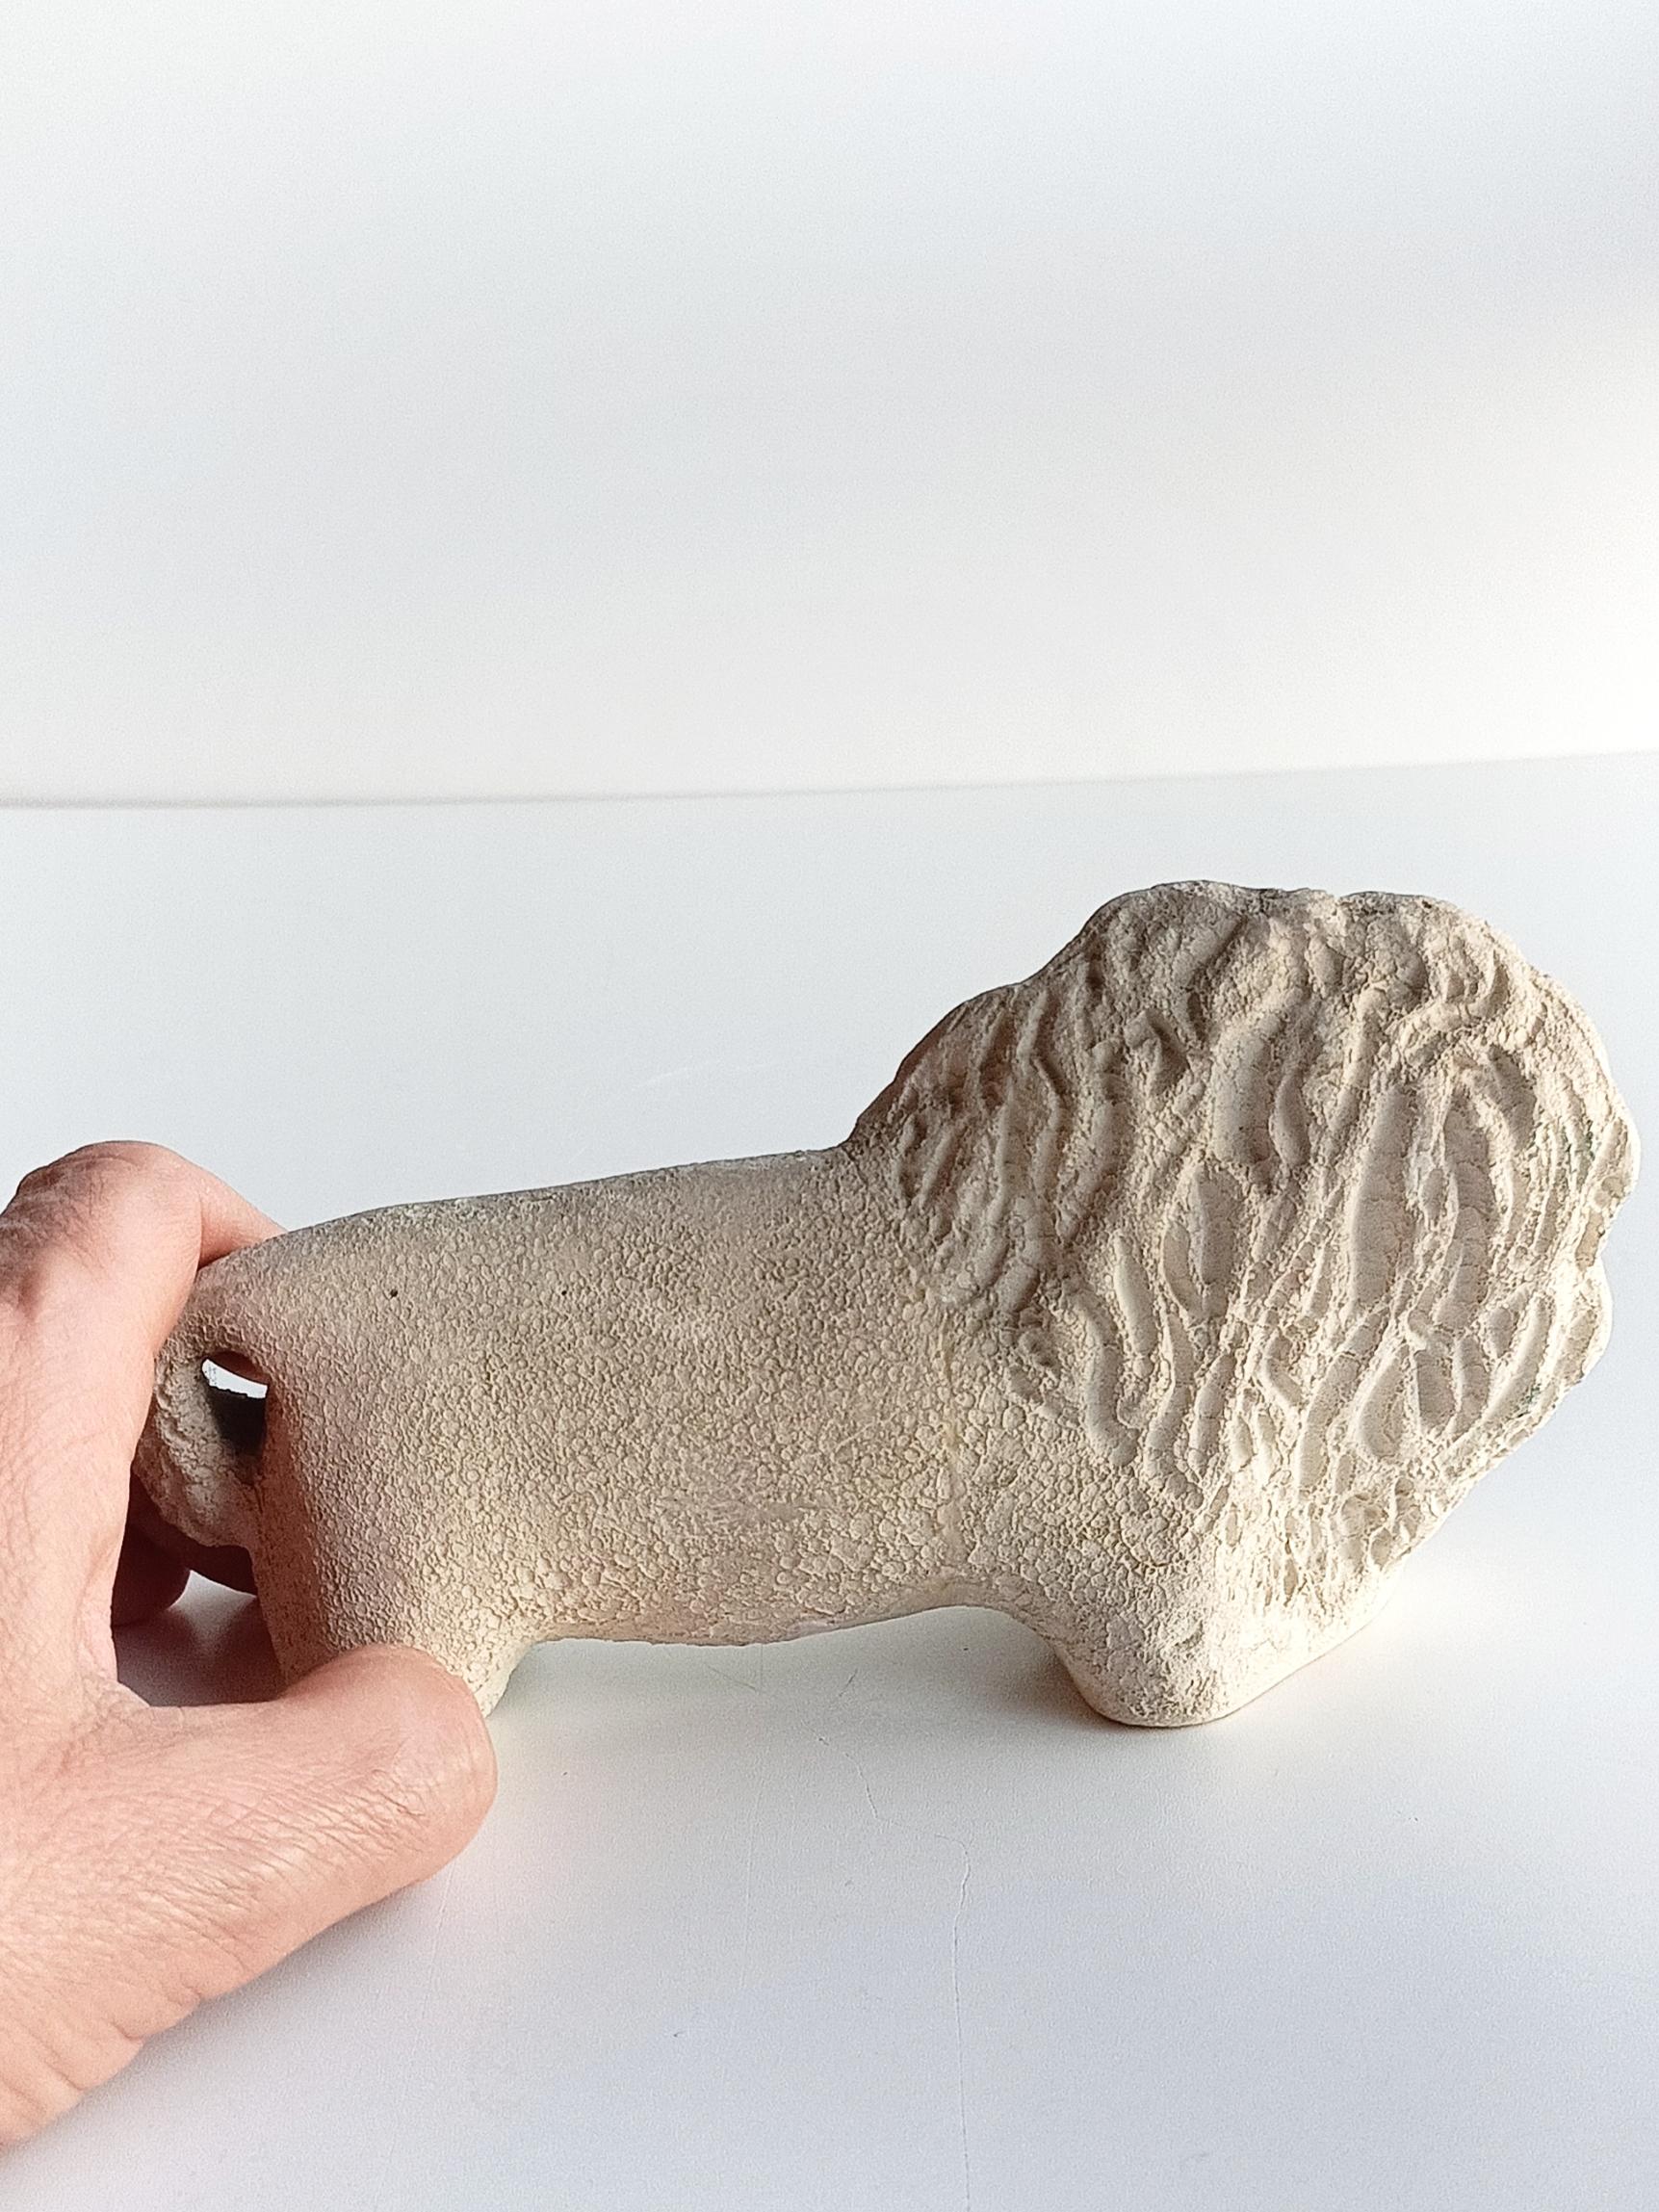 Hand-Crafted Bitossi by Aldo Londi Vintage Mid Century Ceramic Lion Sculpture, Italy, 1960s